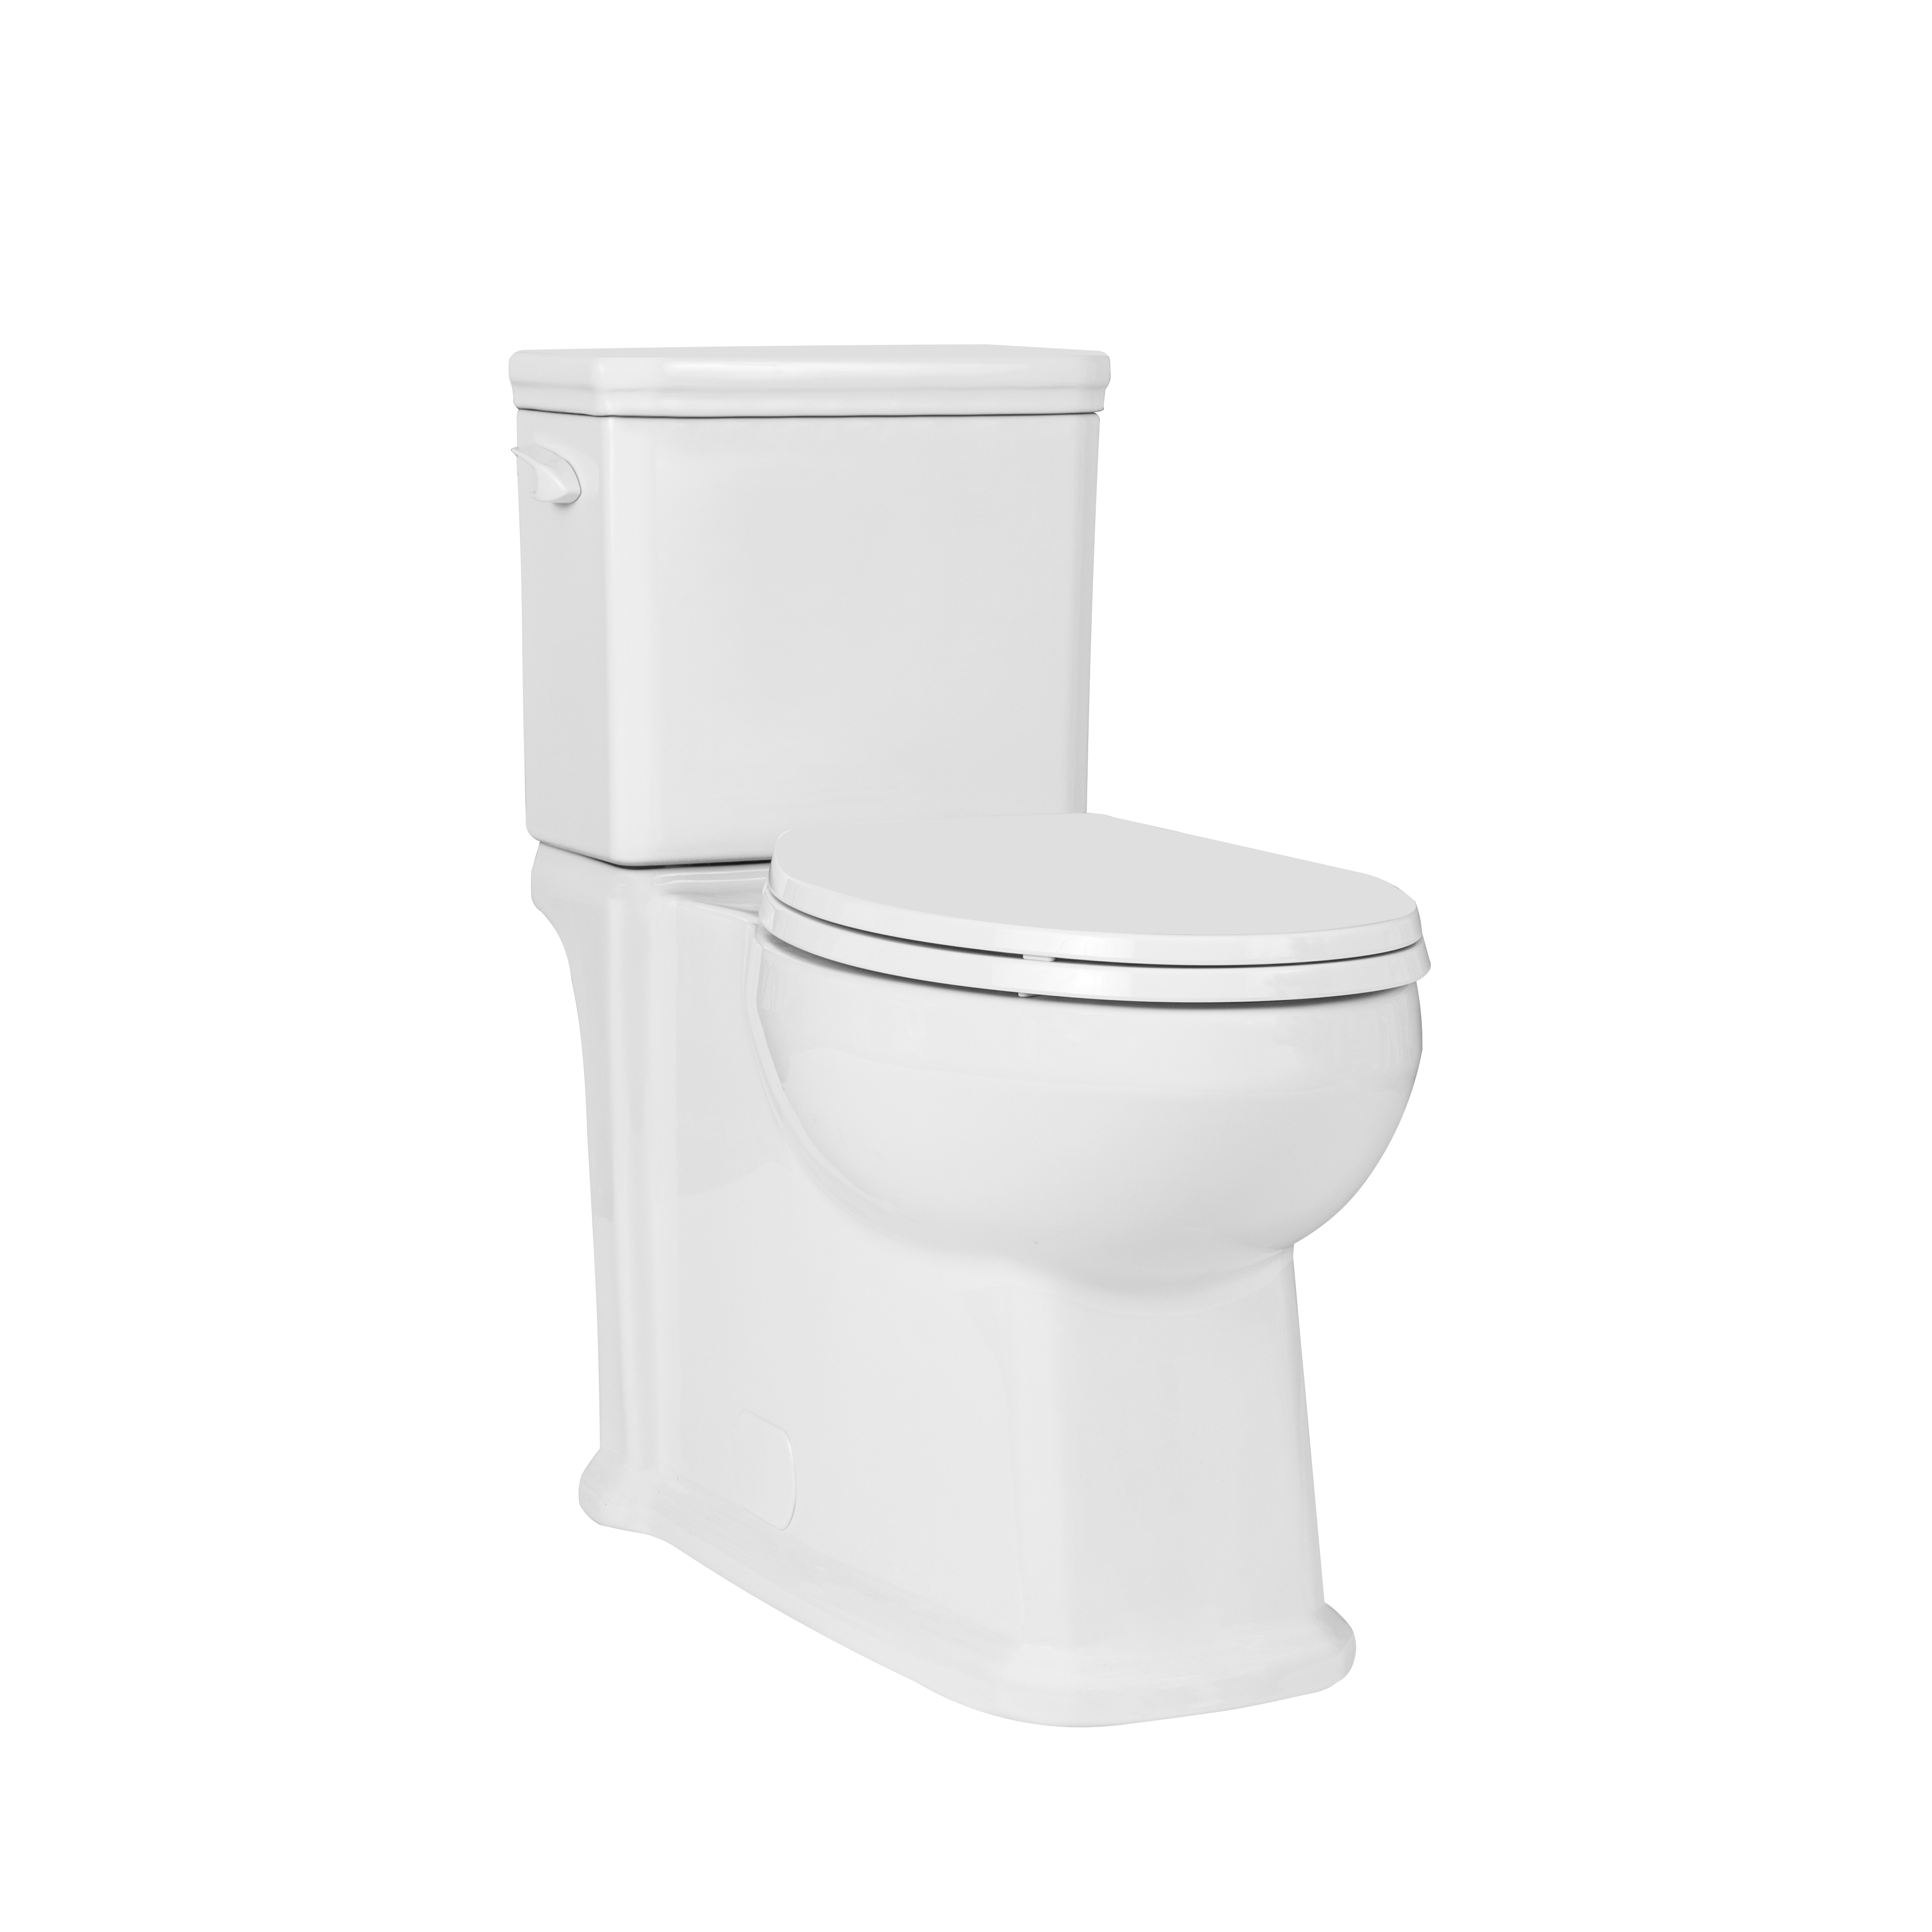 Vieira Two Piece Toilet Concealed Elongated Plus Height Bowl